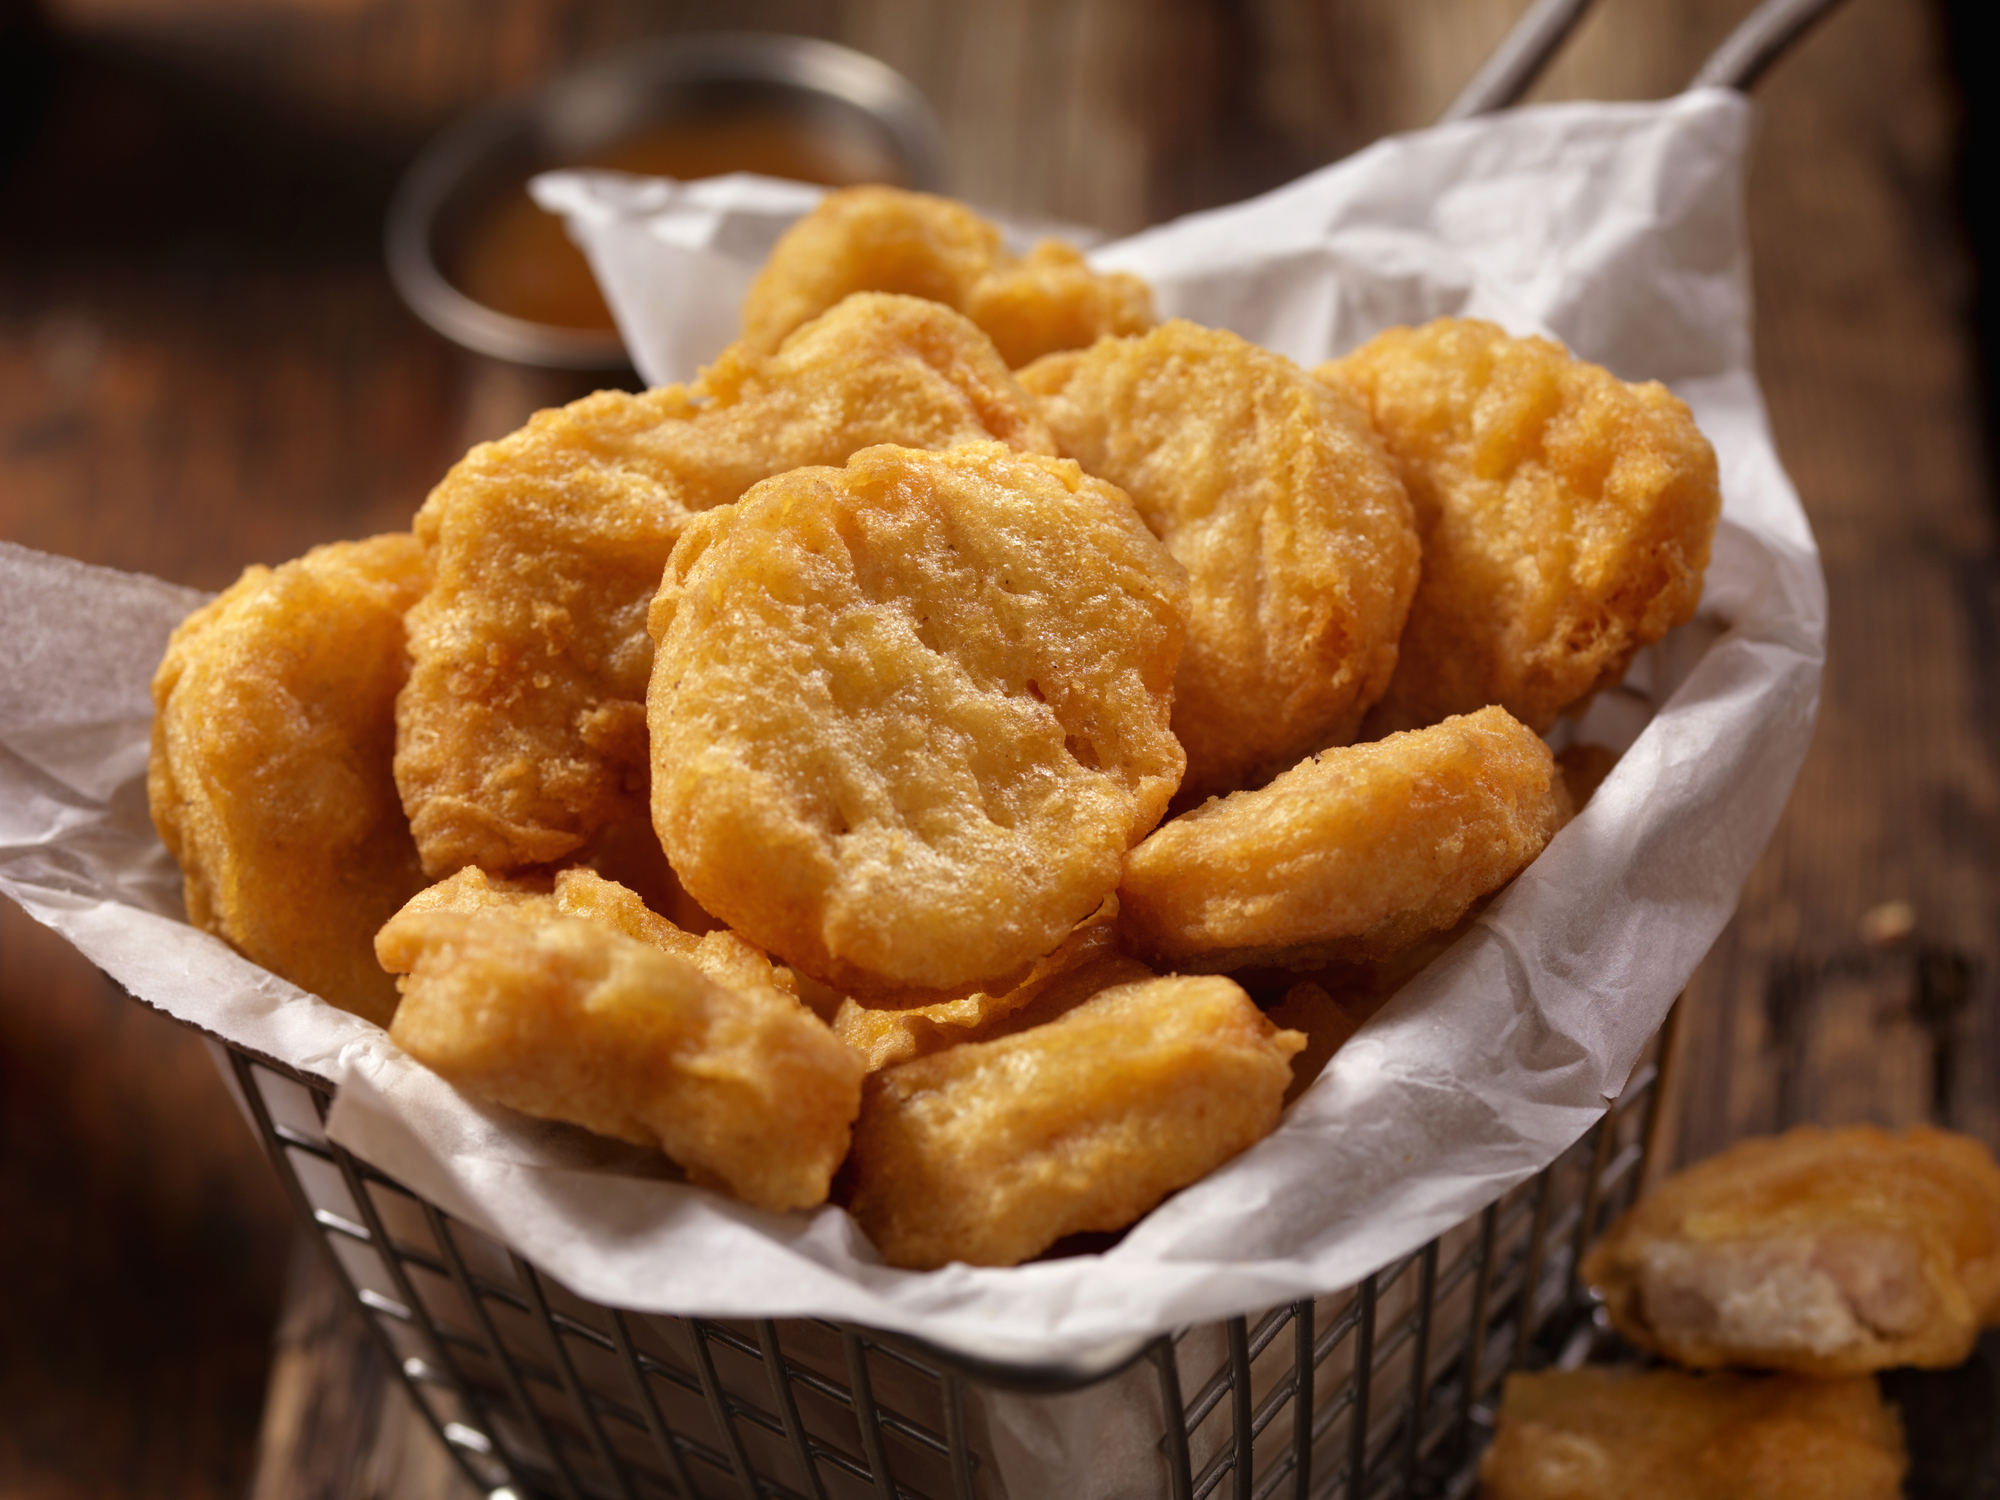 A basket filled with crispy, golden chicken nuggets on a wooden table